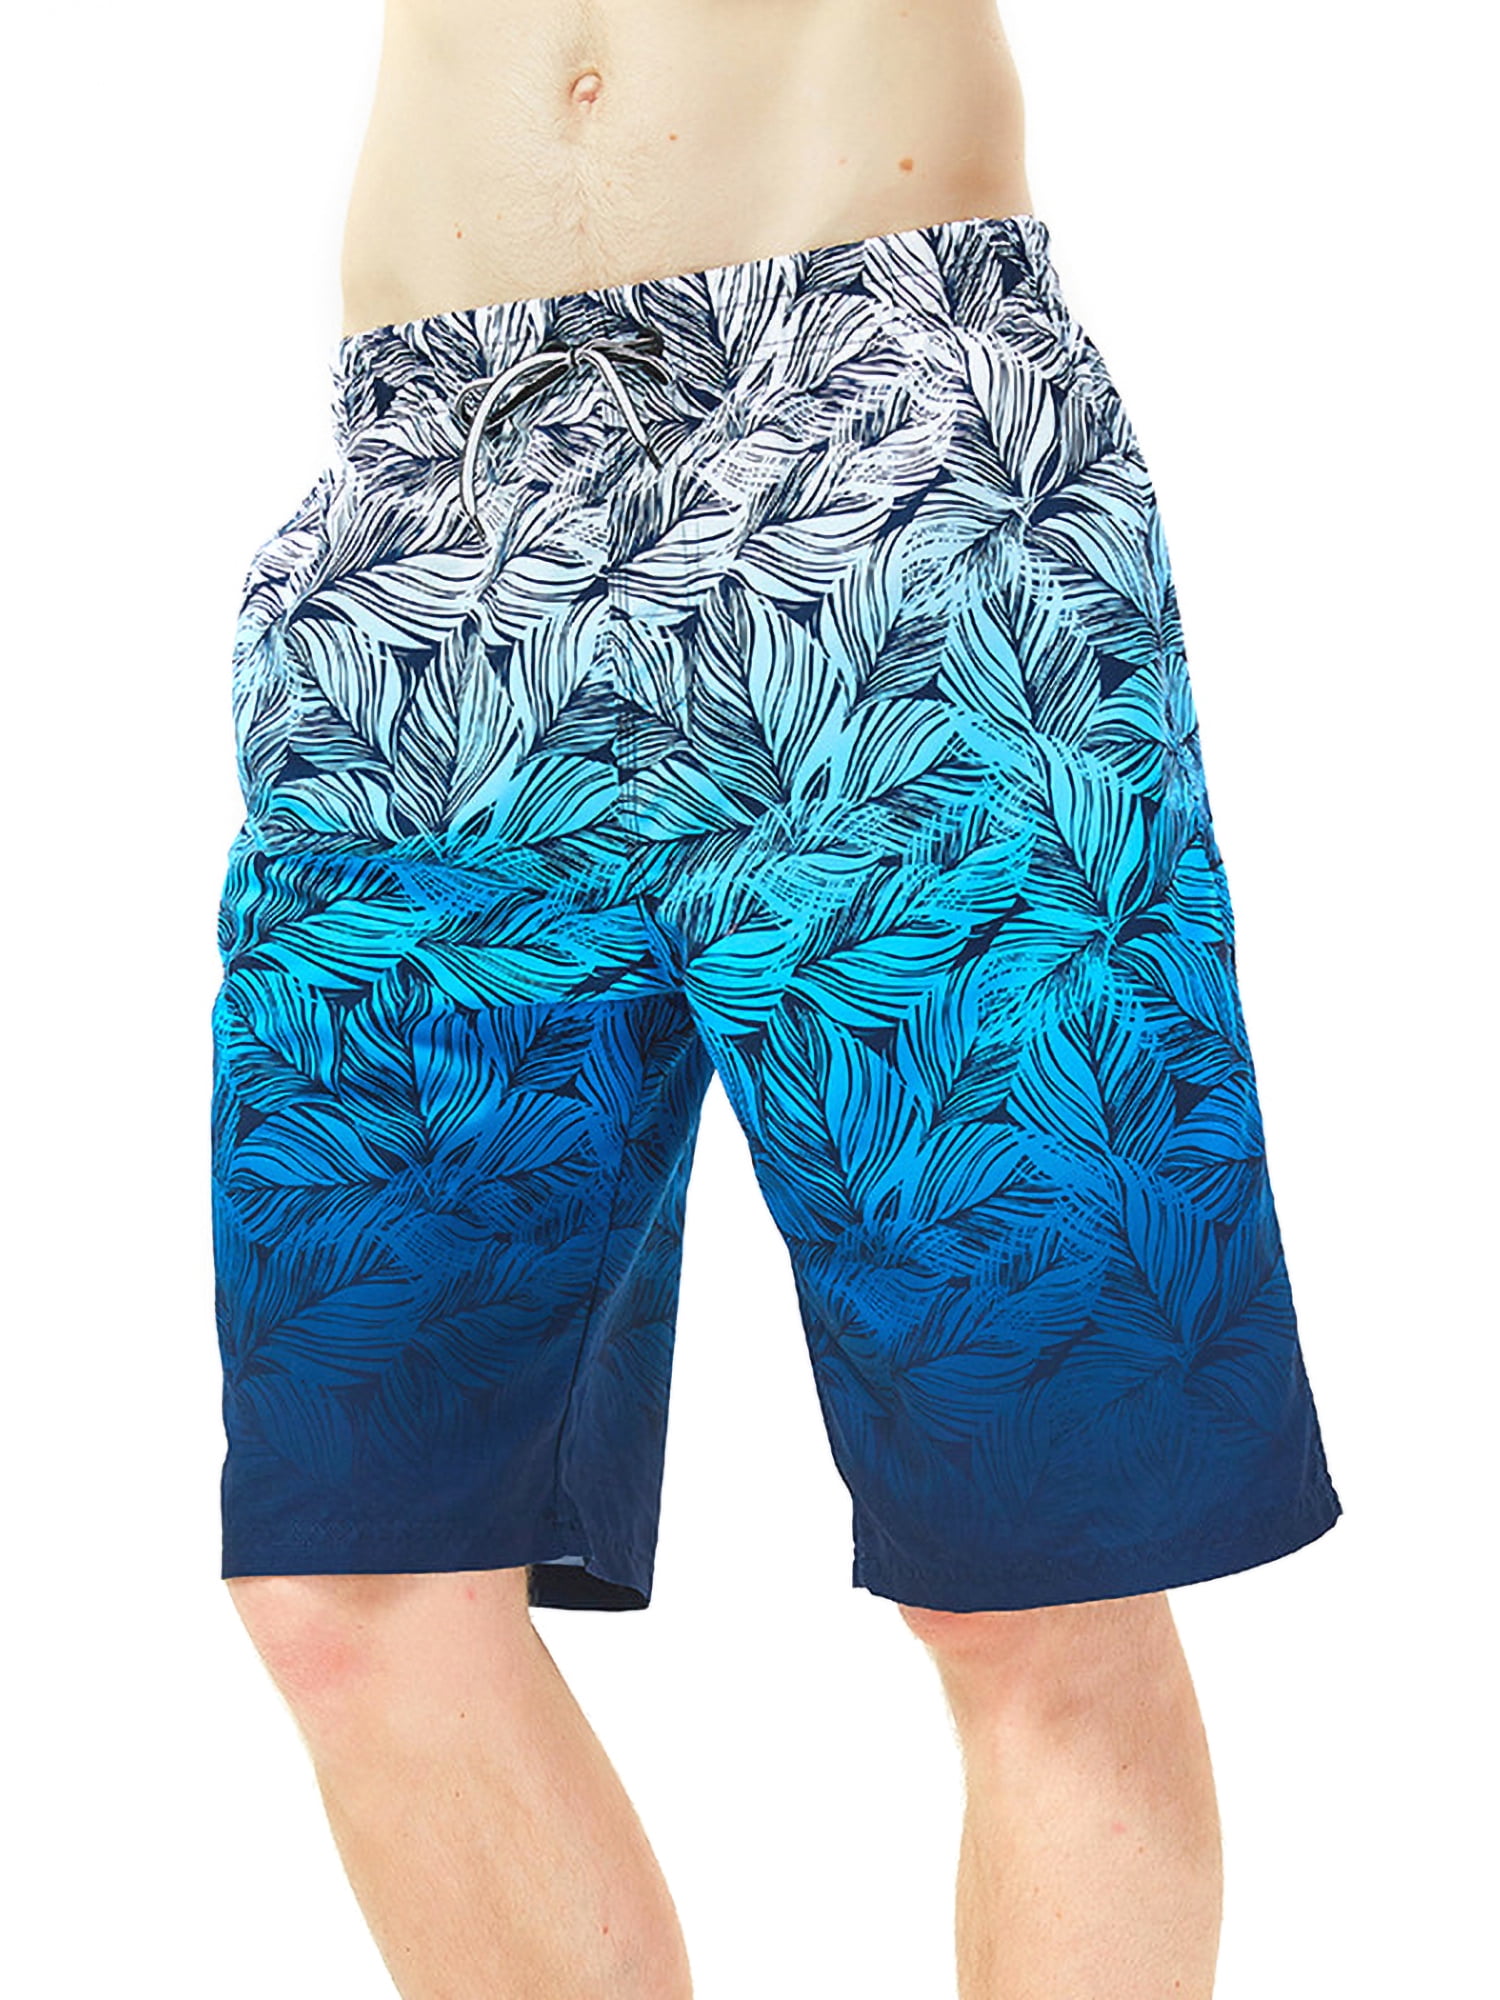 JERECY Mens Swim Trunks Happy Easter Green Colorful Egg Gift Quick Dry Board Shorts with Drawstring and Pockets